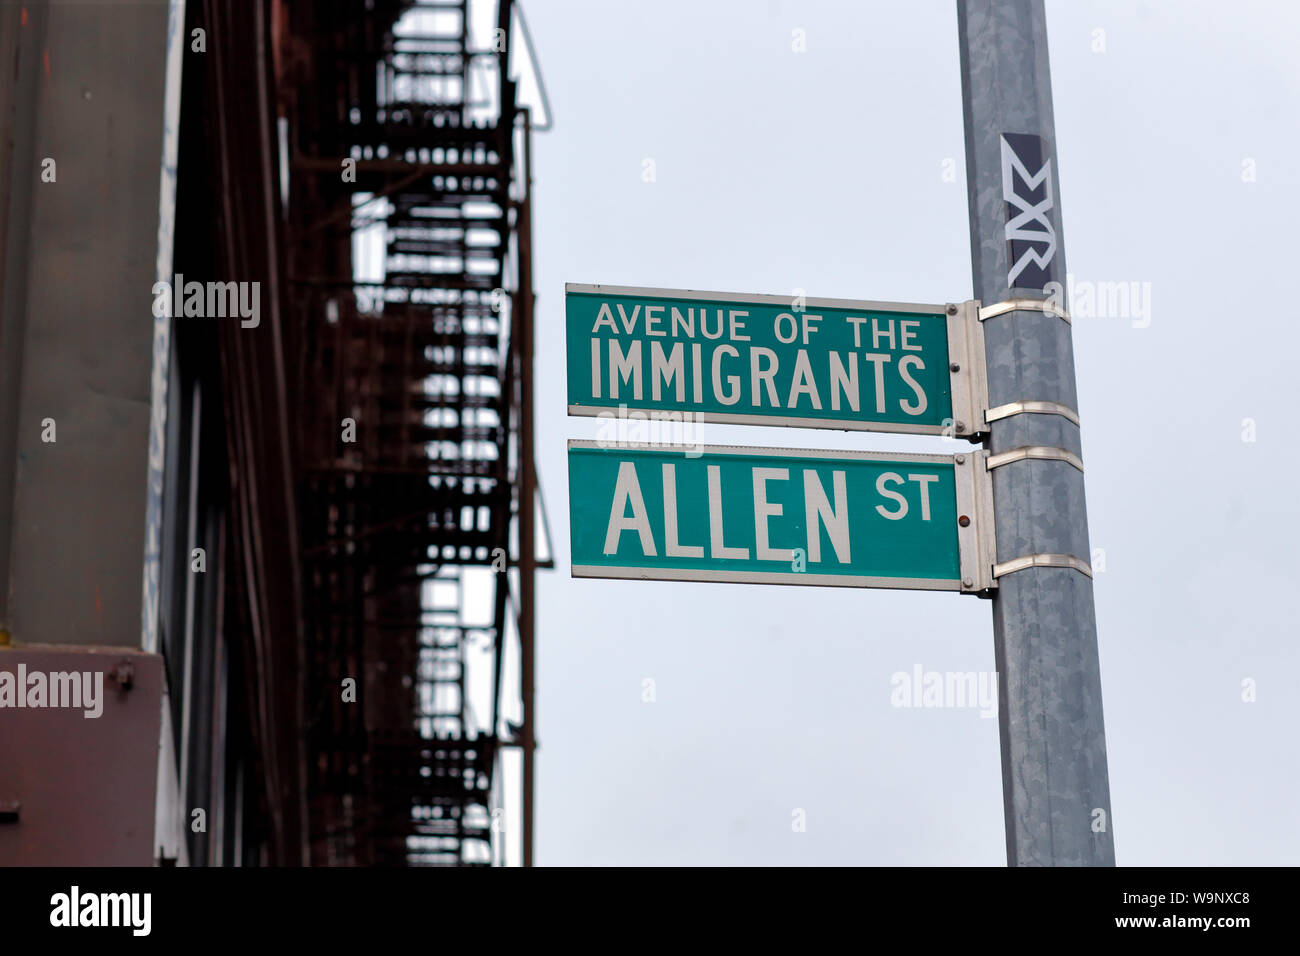 Street signage proclaiming Allen Street as Avenue of the Immigrants in New York City's Lower East Side Stock Photo